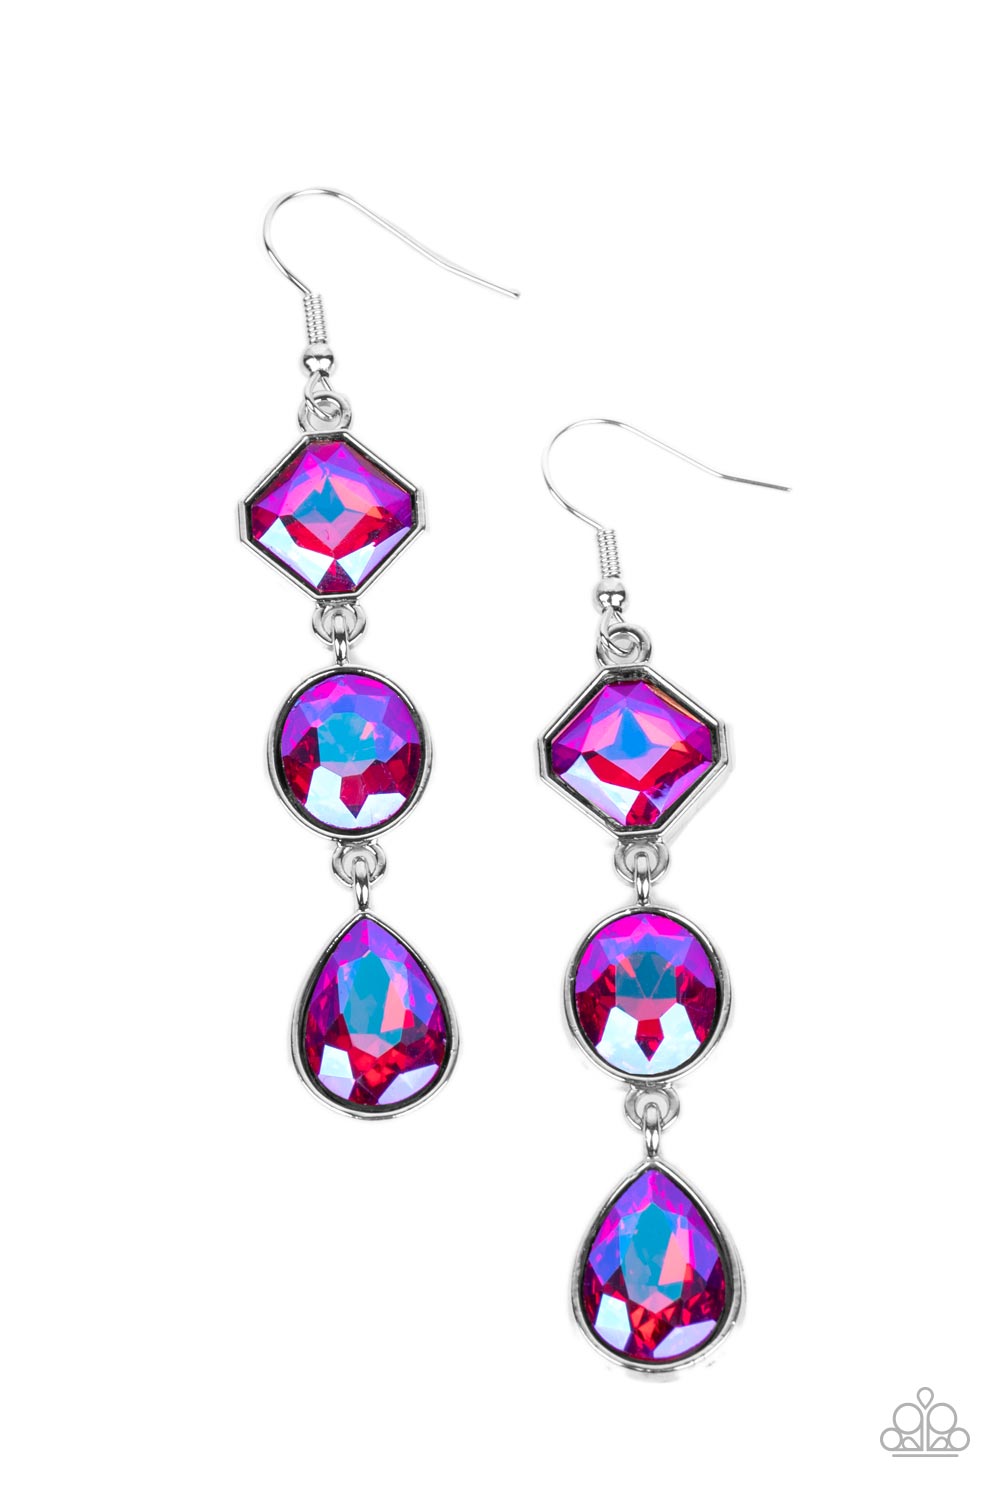 Reflective Rhinestones Pink Iridescent Earrings - Paparazzi Accessories- lightbox - CarasShop.com - $5 Jewelry by Cara Jewels